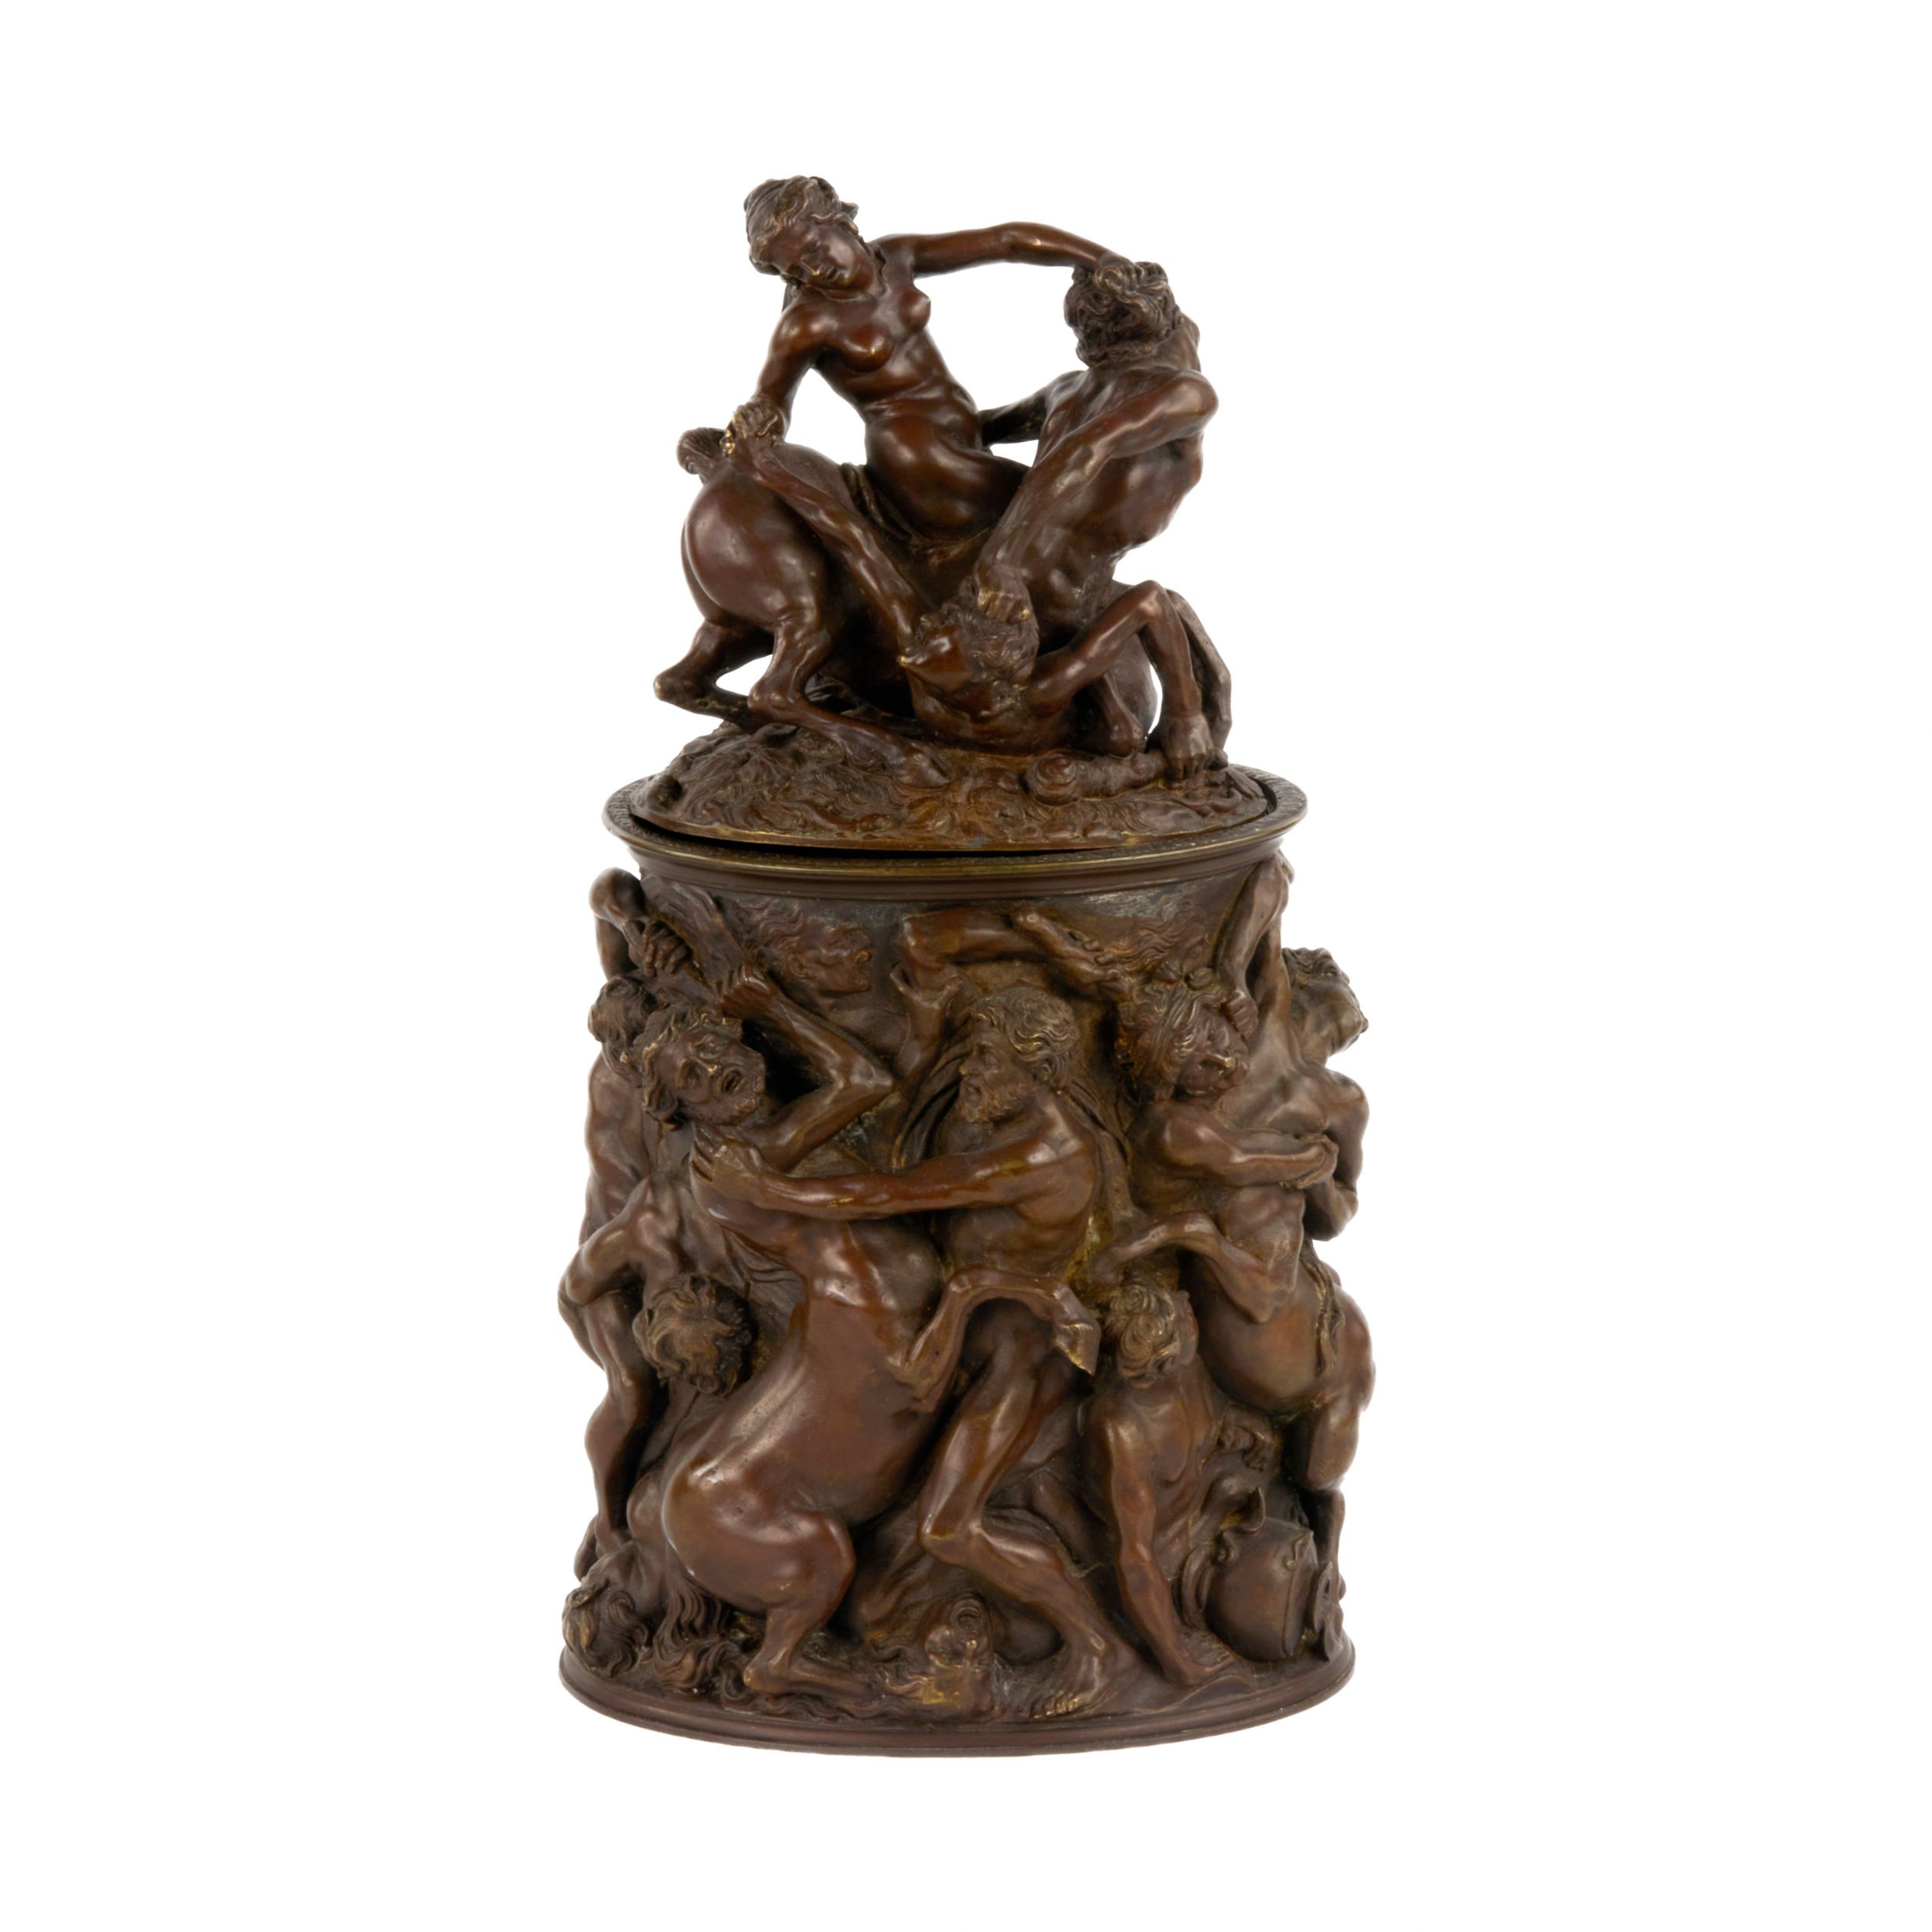 Tobacco-pot-of-patinated-bronze-Battle-of-centaurs-with-Lapiths-